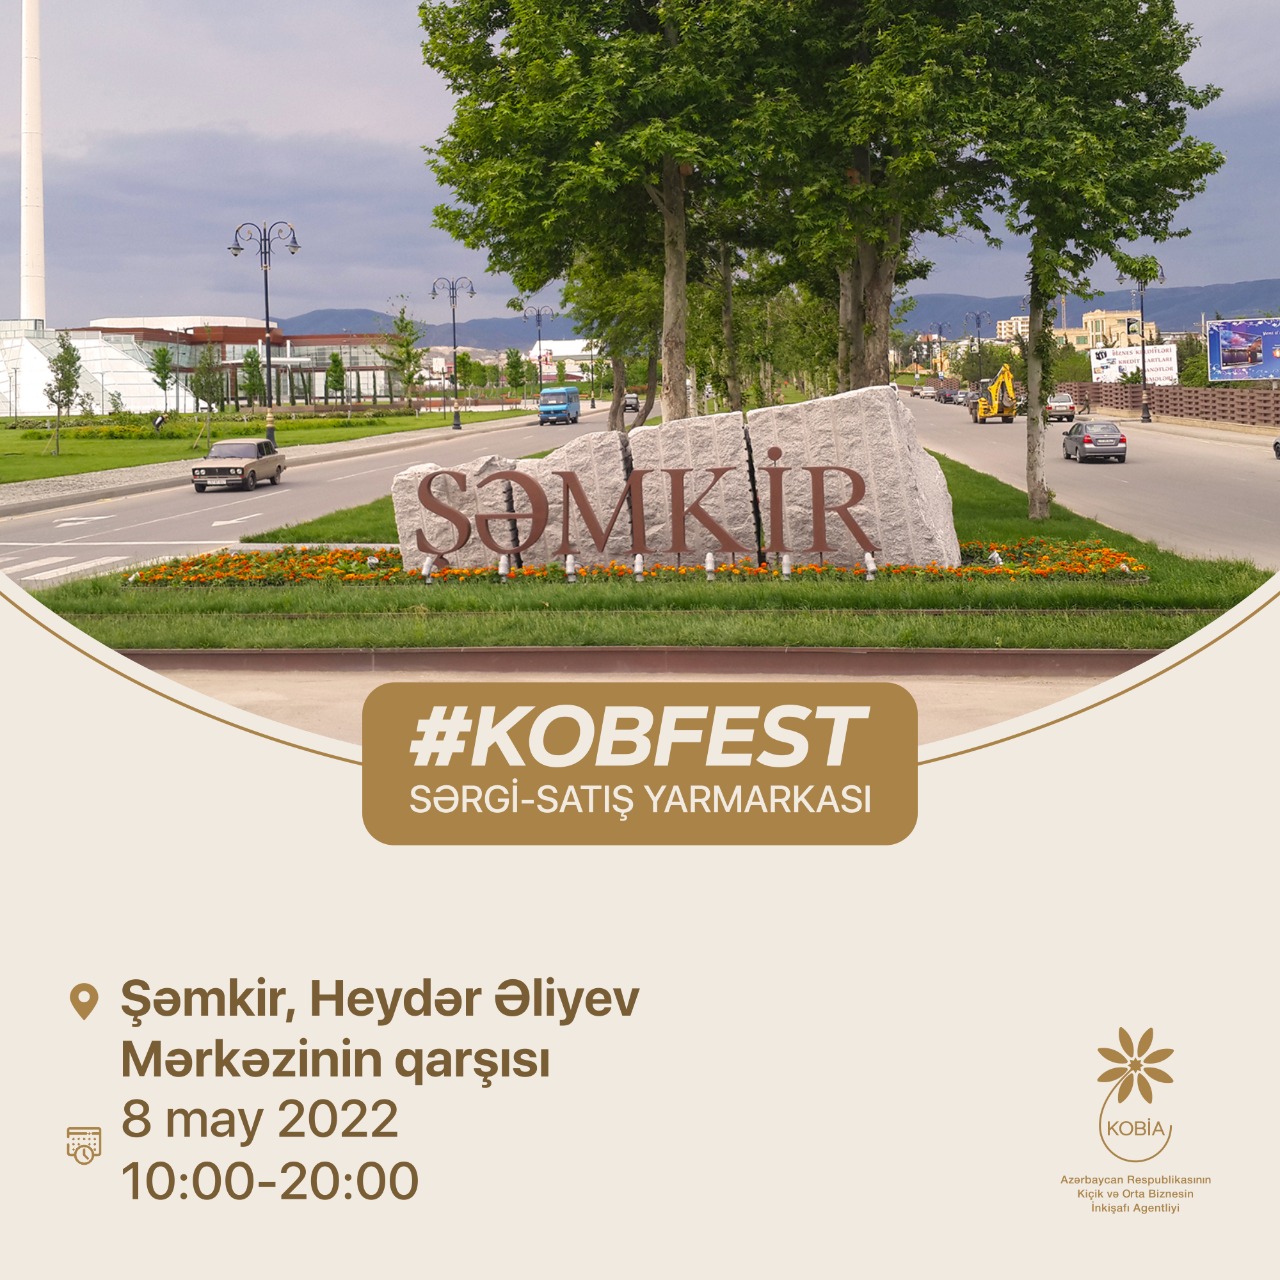 We invite residents and guests of Shamkir region to "KOB Fest"